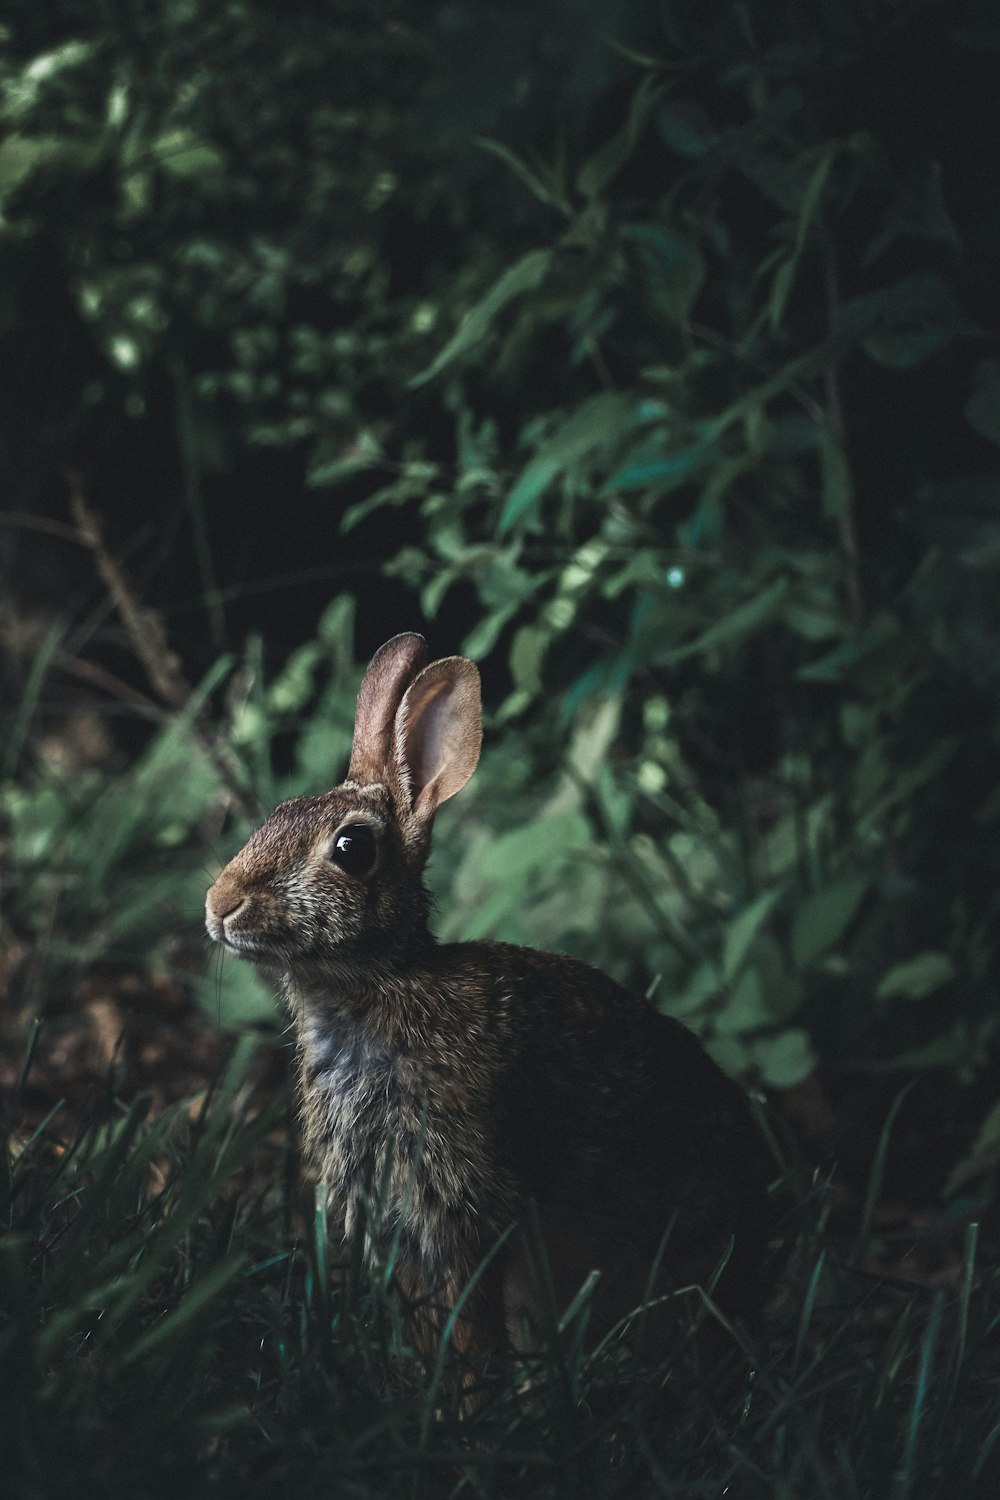 a rabbit is sitting in the grass near some bushes